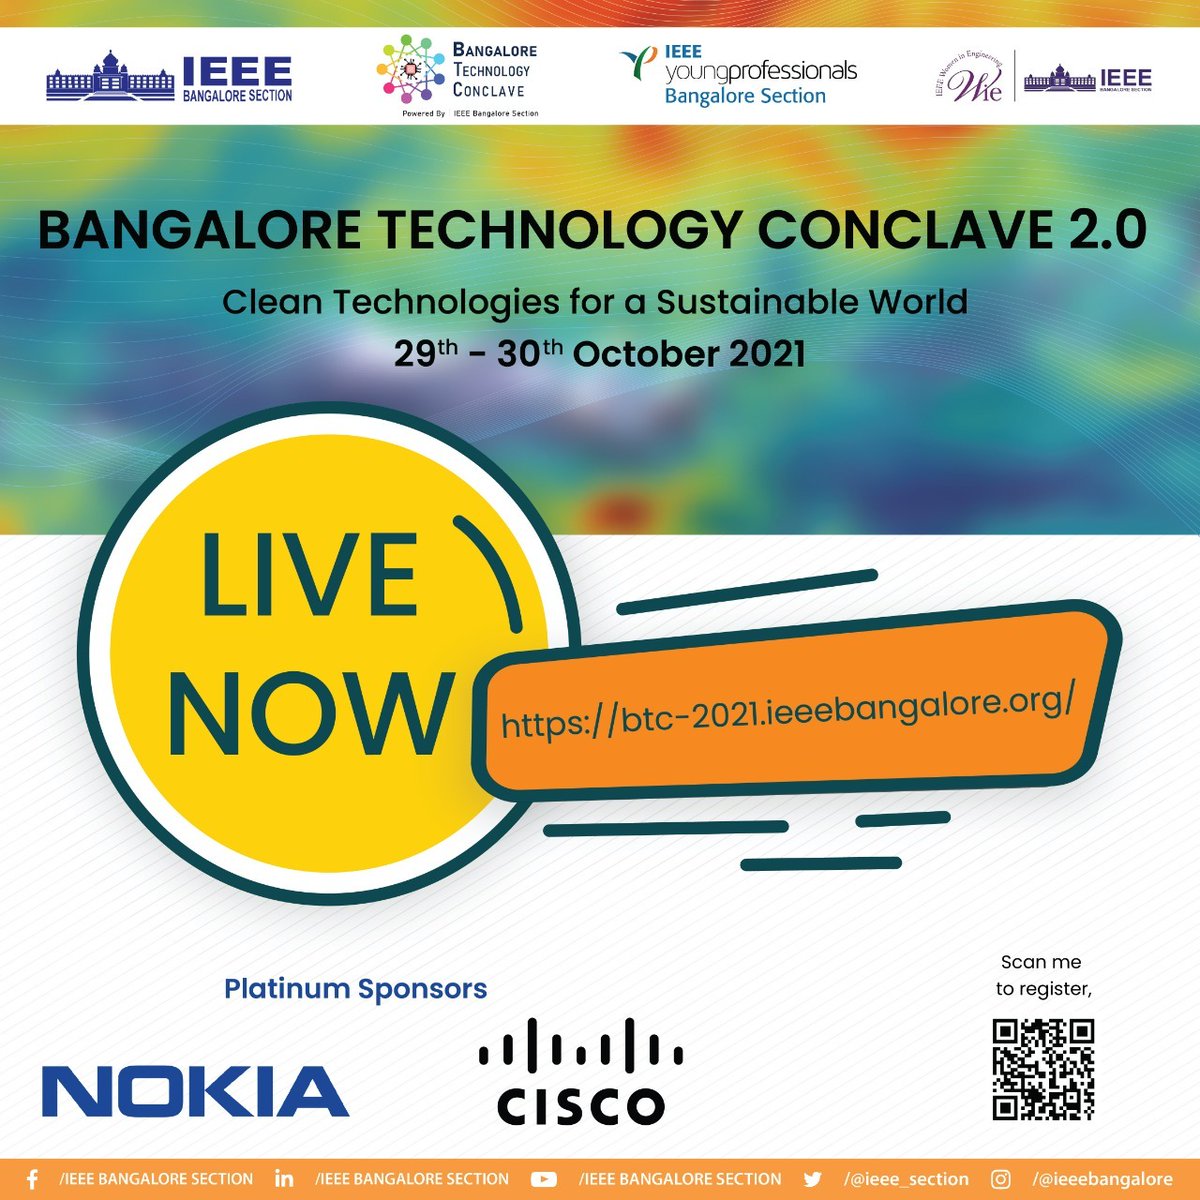 We are live now !!

#ieee #ieeebangaloreyp #ieeebangaloresection #btc #ypgs2021 #tech #conclave #clean #technology #global #summit